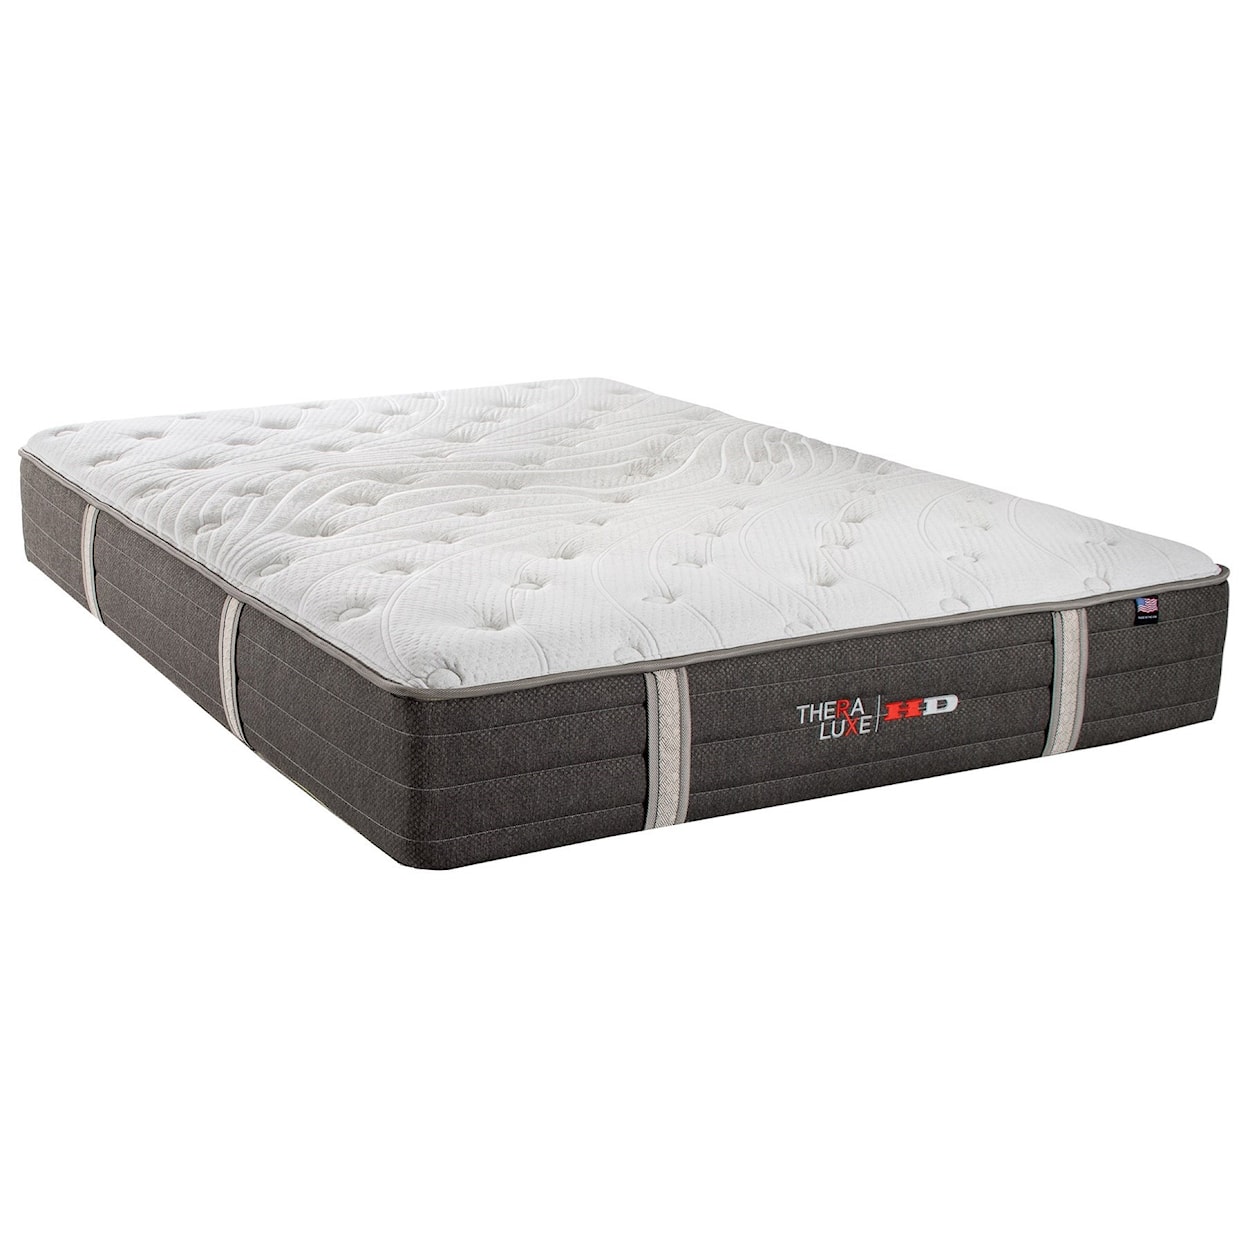 Therapedic Theraluxe Spruce Queen Pocketed Coil Mattress